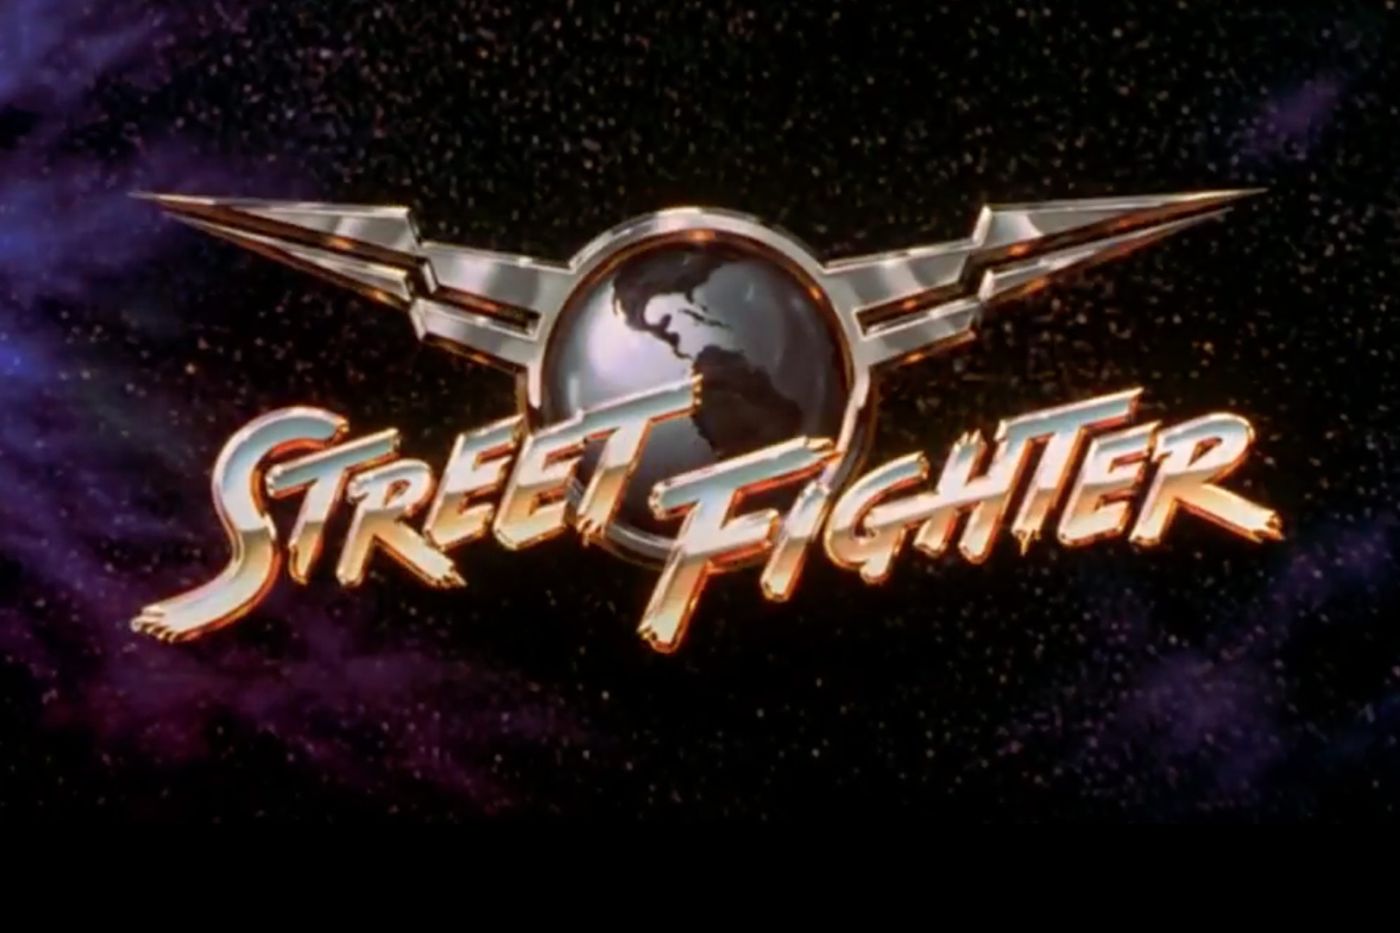 The 1994 Street Fighter Movie Is Good, Actually, And Yes, I Want To Fight  About It